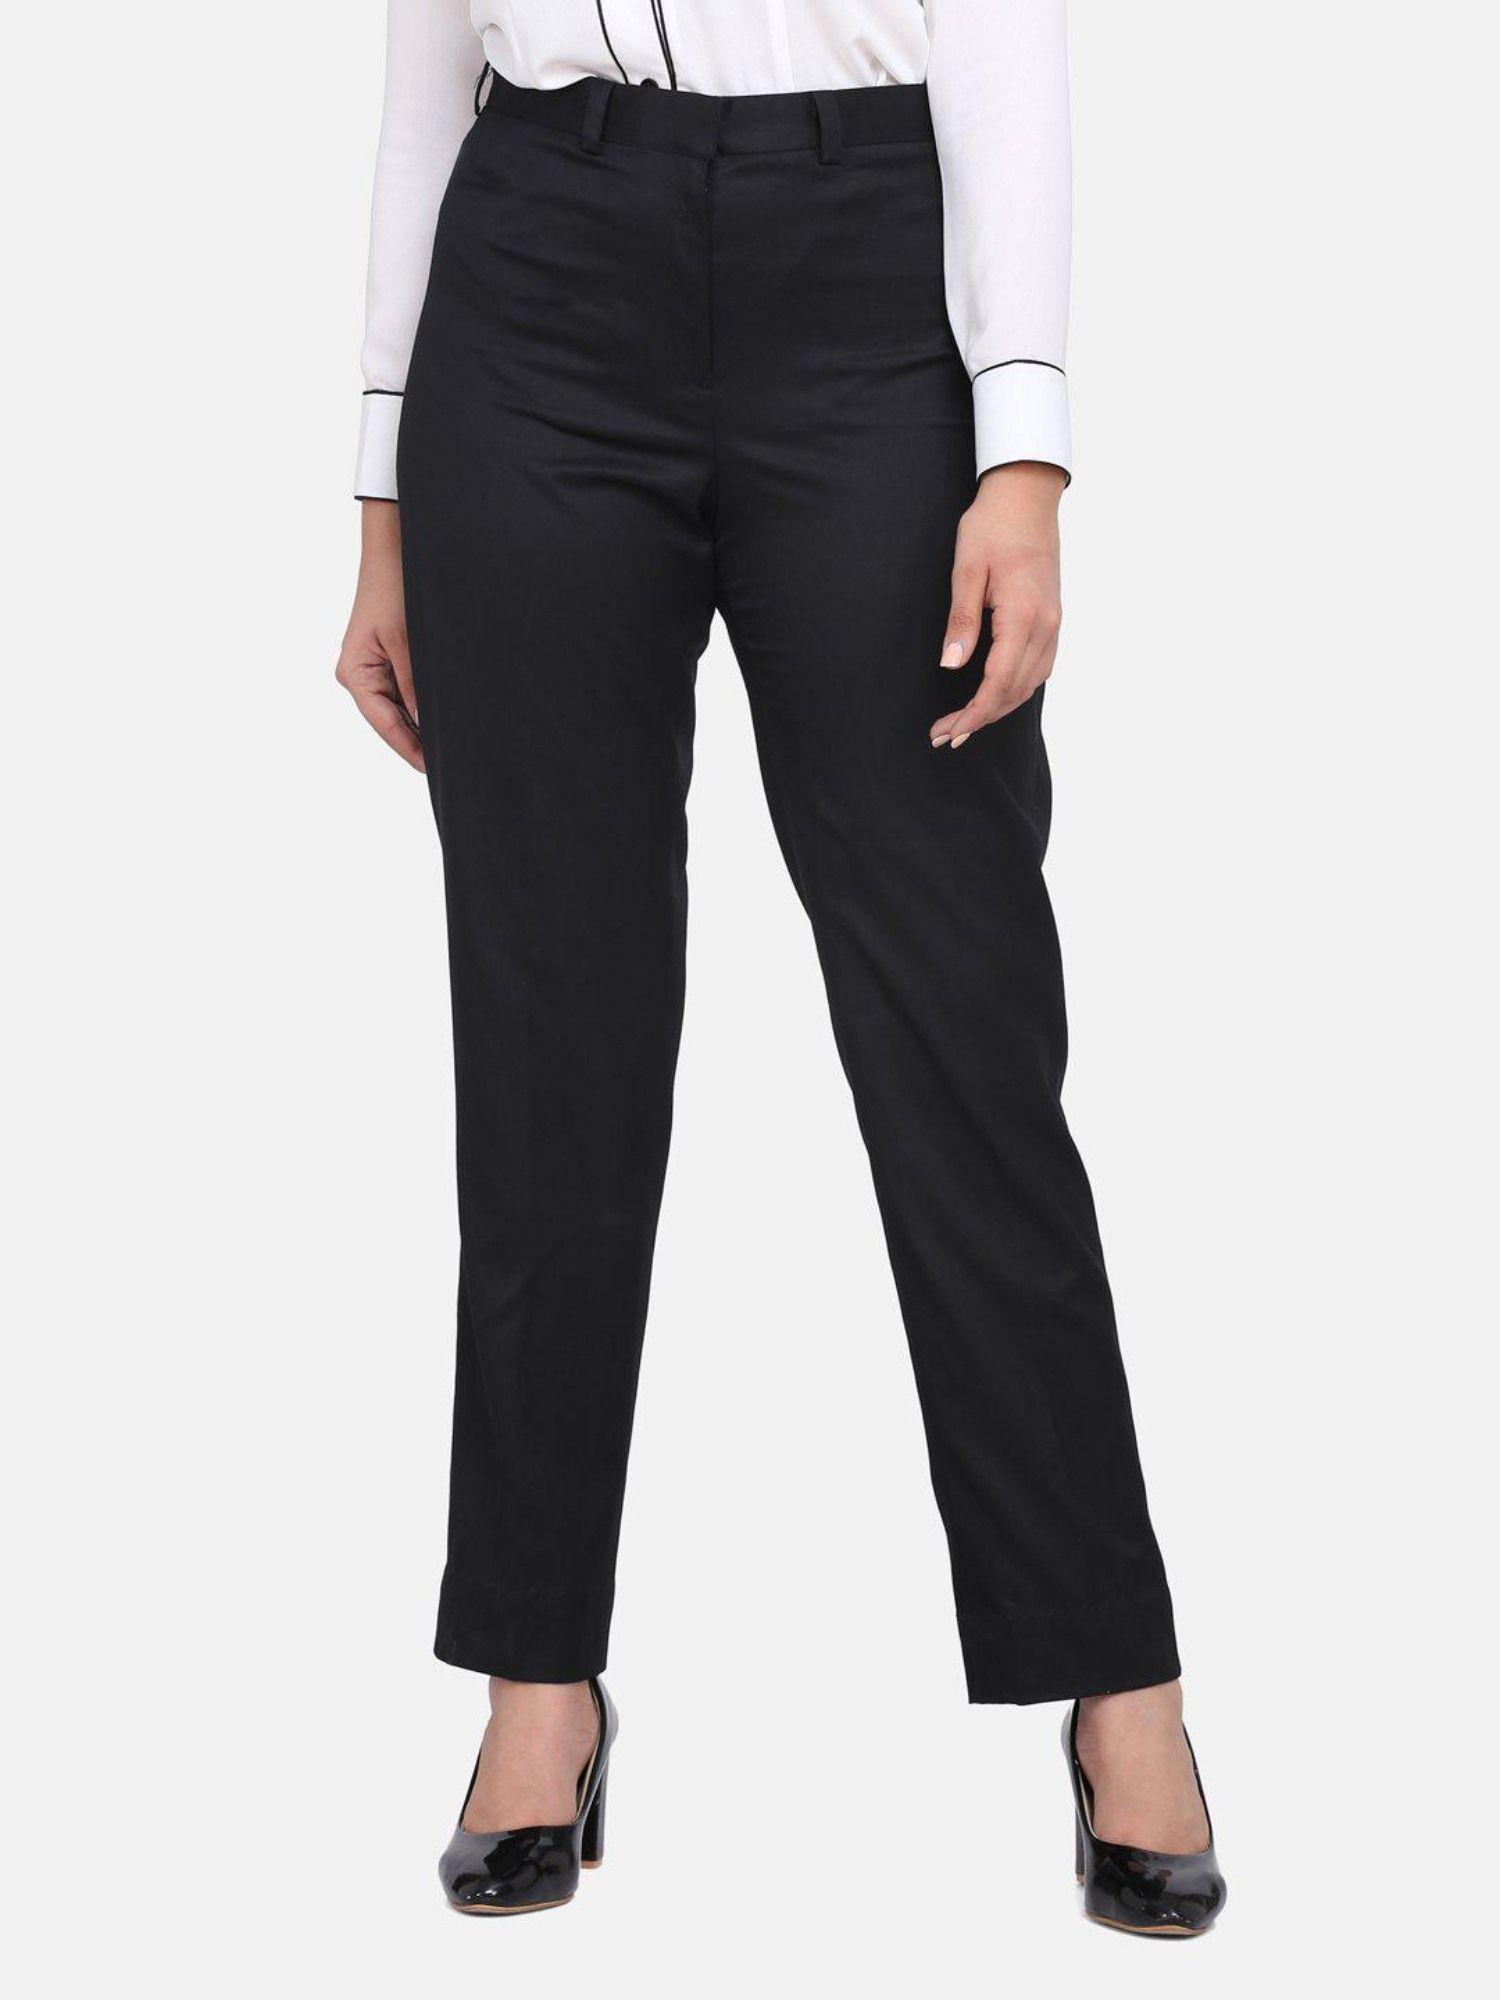 poly cotton formal trousers - black